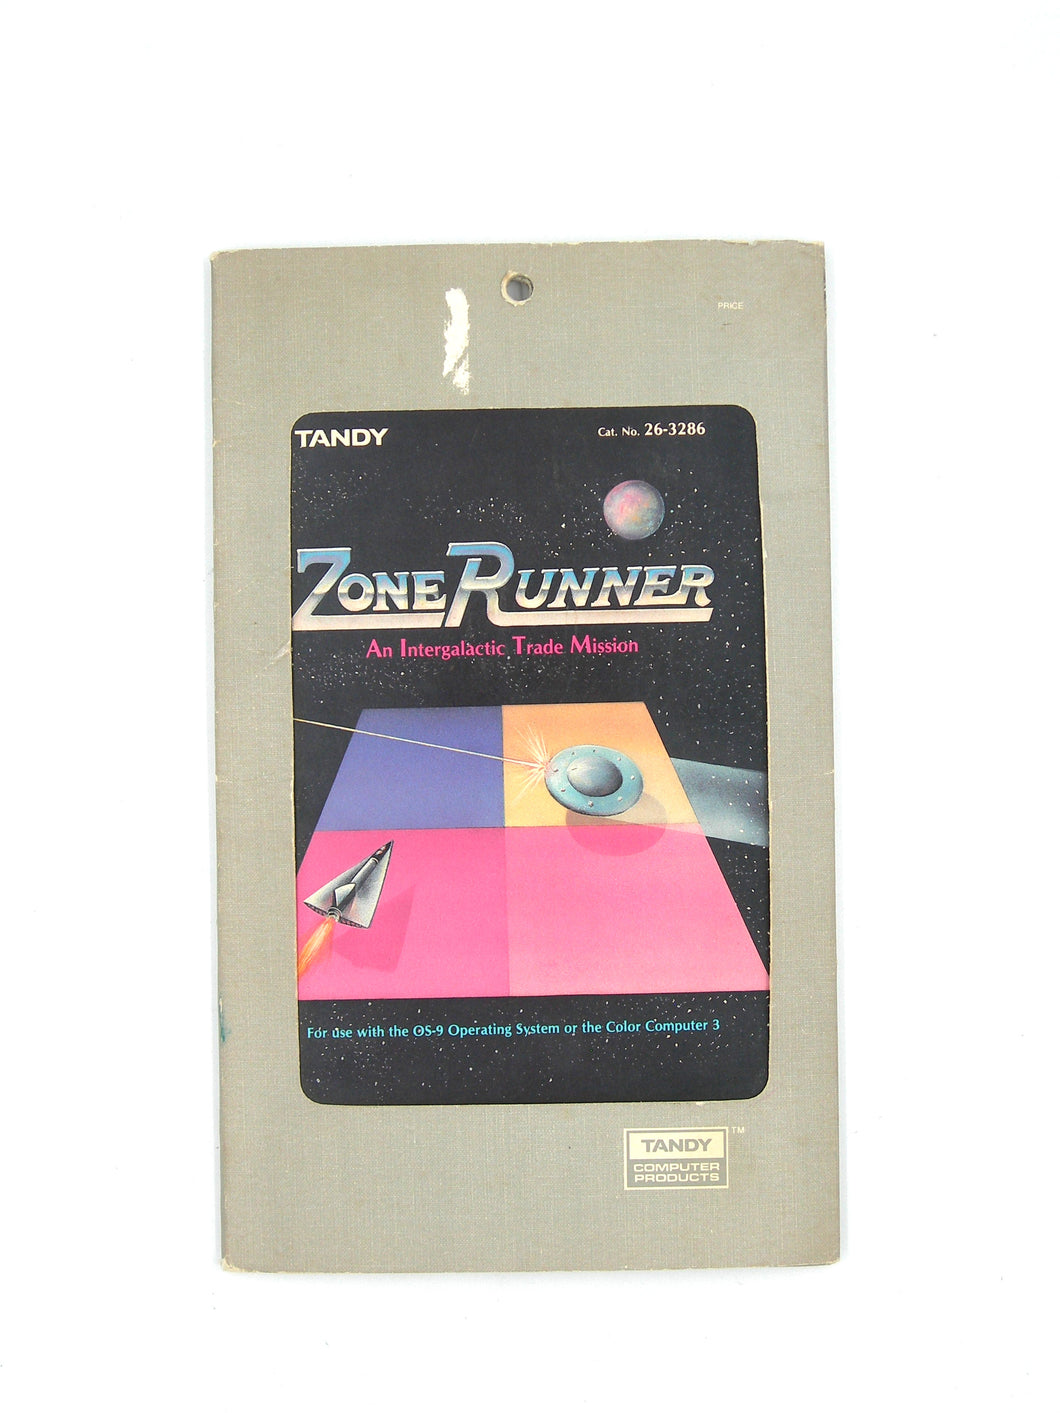 Tandy Color Computer 3 disk - Zone Runner 26-3286 (new,open)